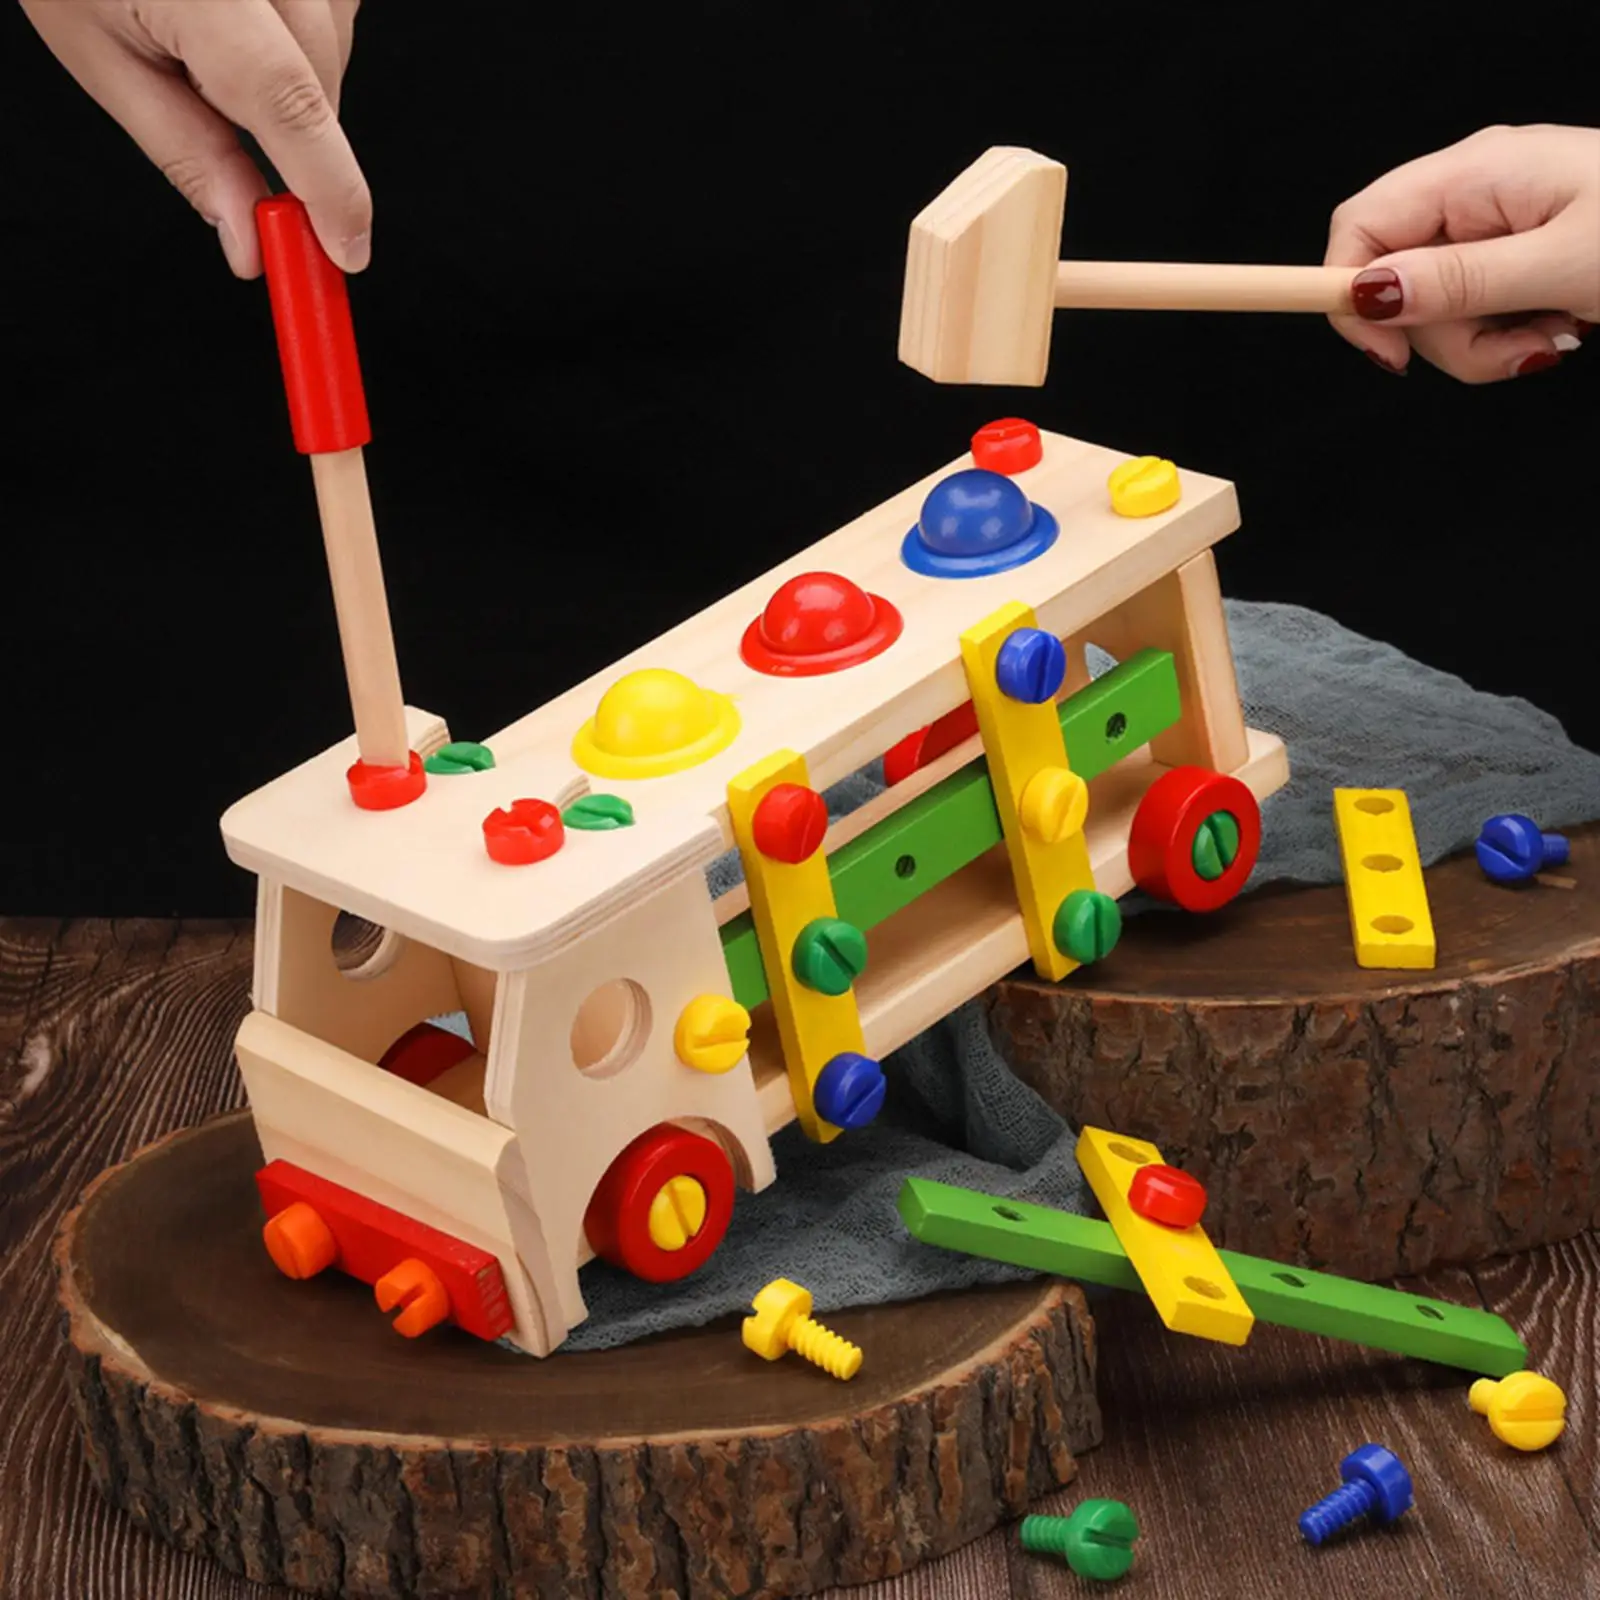 Assembly Disassembly Engineering Car Puzzle Toy Kids Preschoolers Boys Children